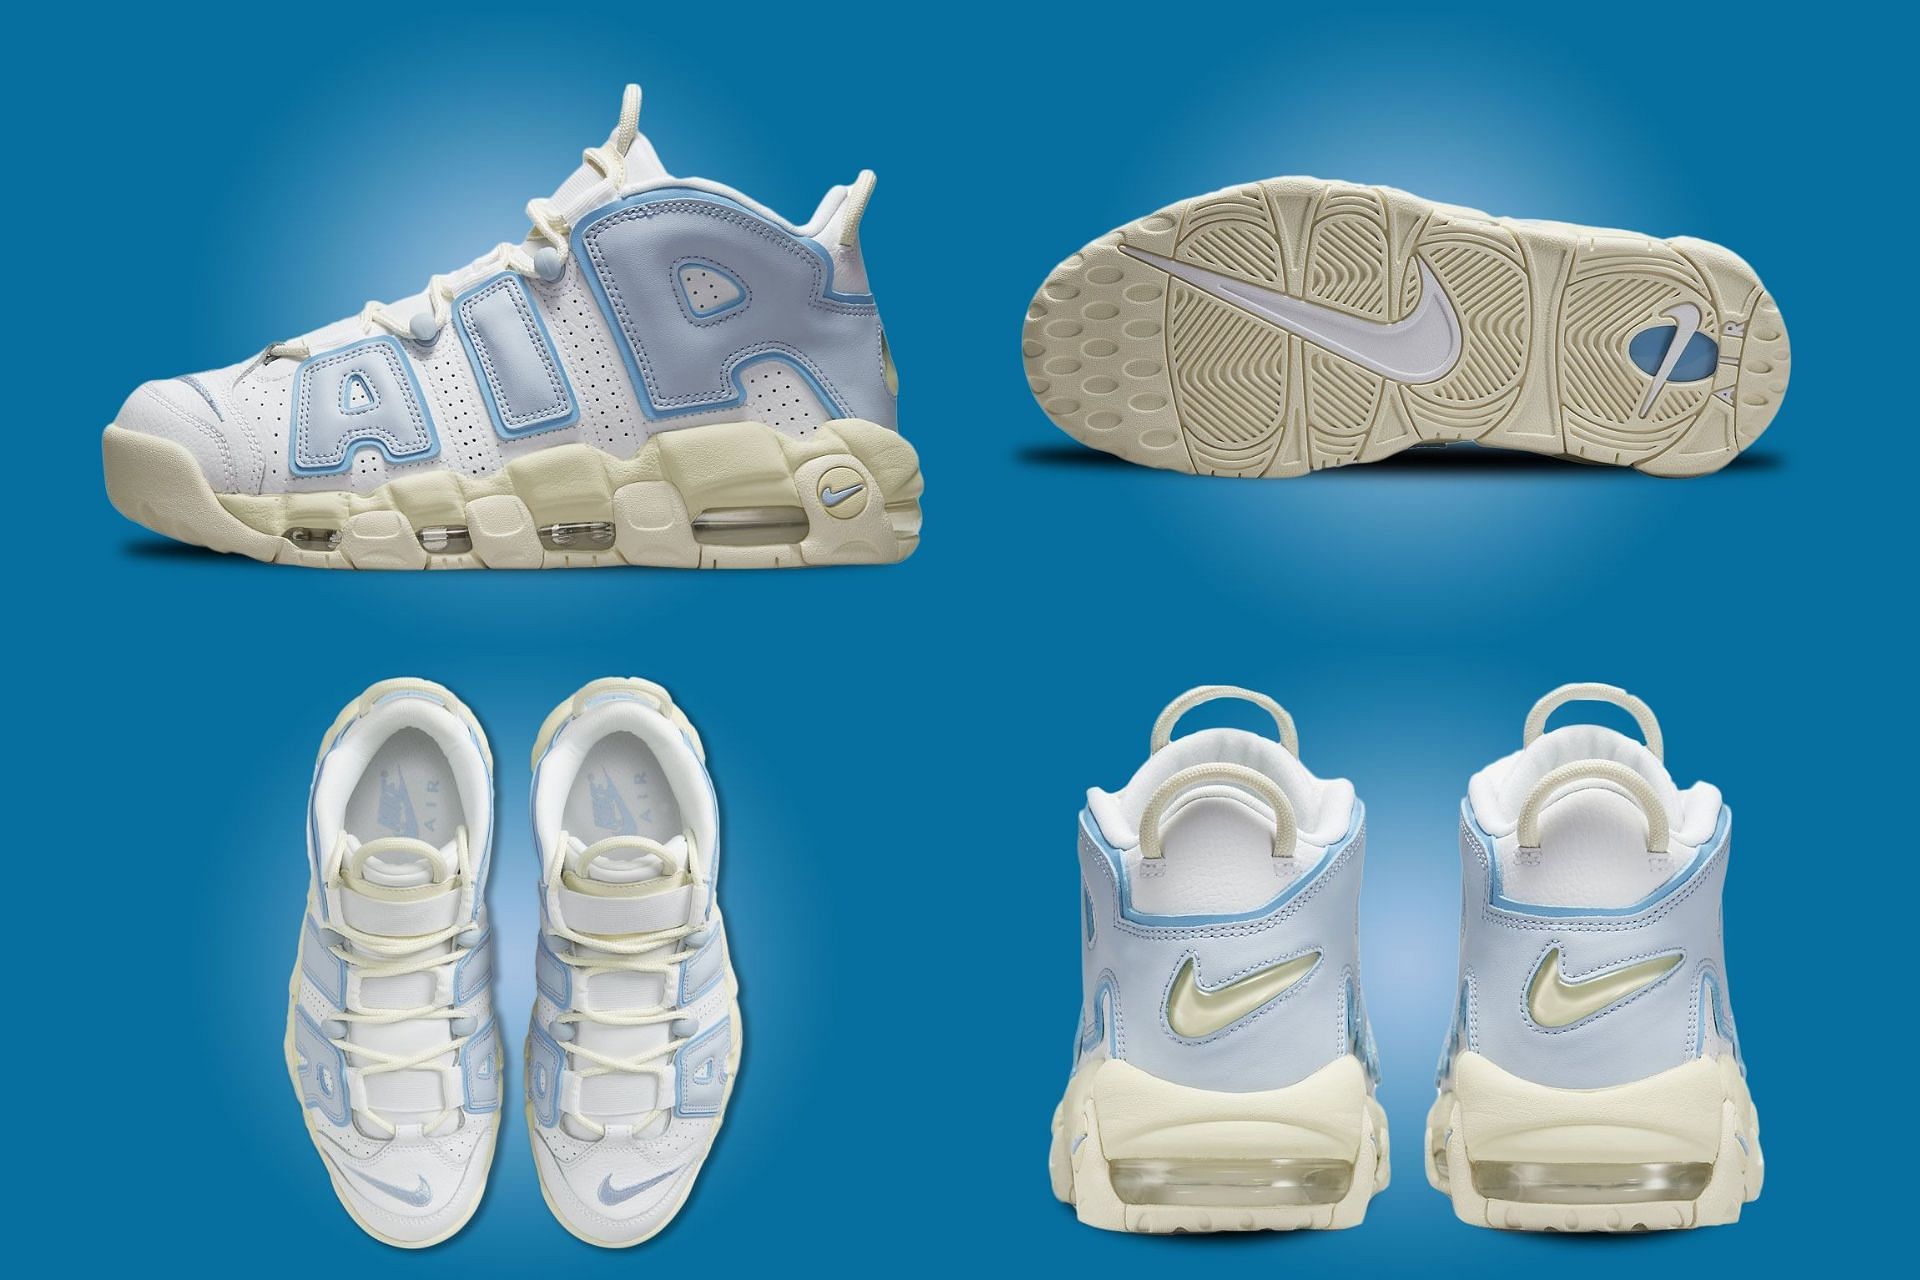 Nike Air More Uptempo White Ocean Bliss Raffles and Release Date